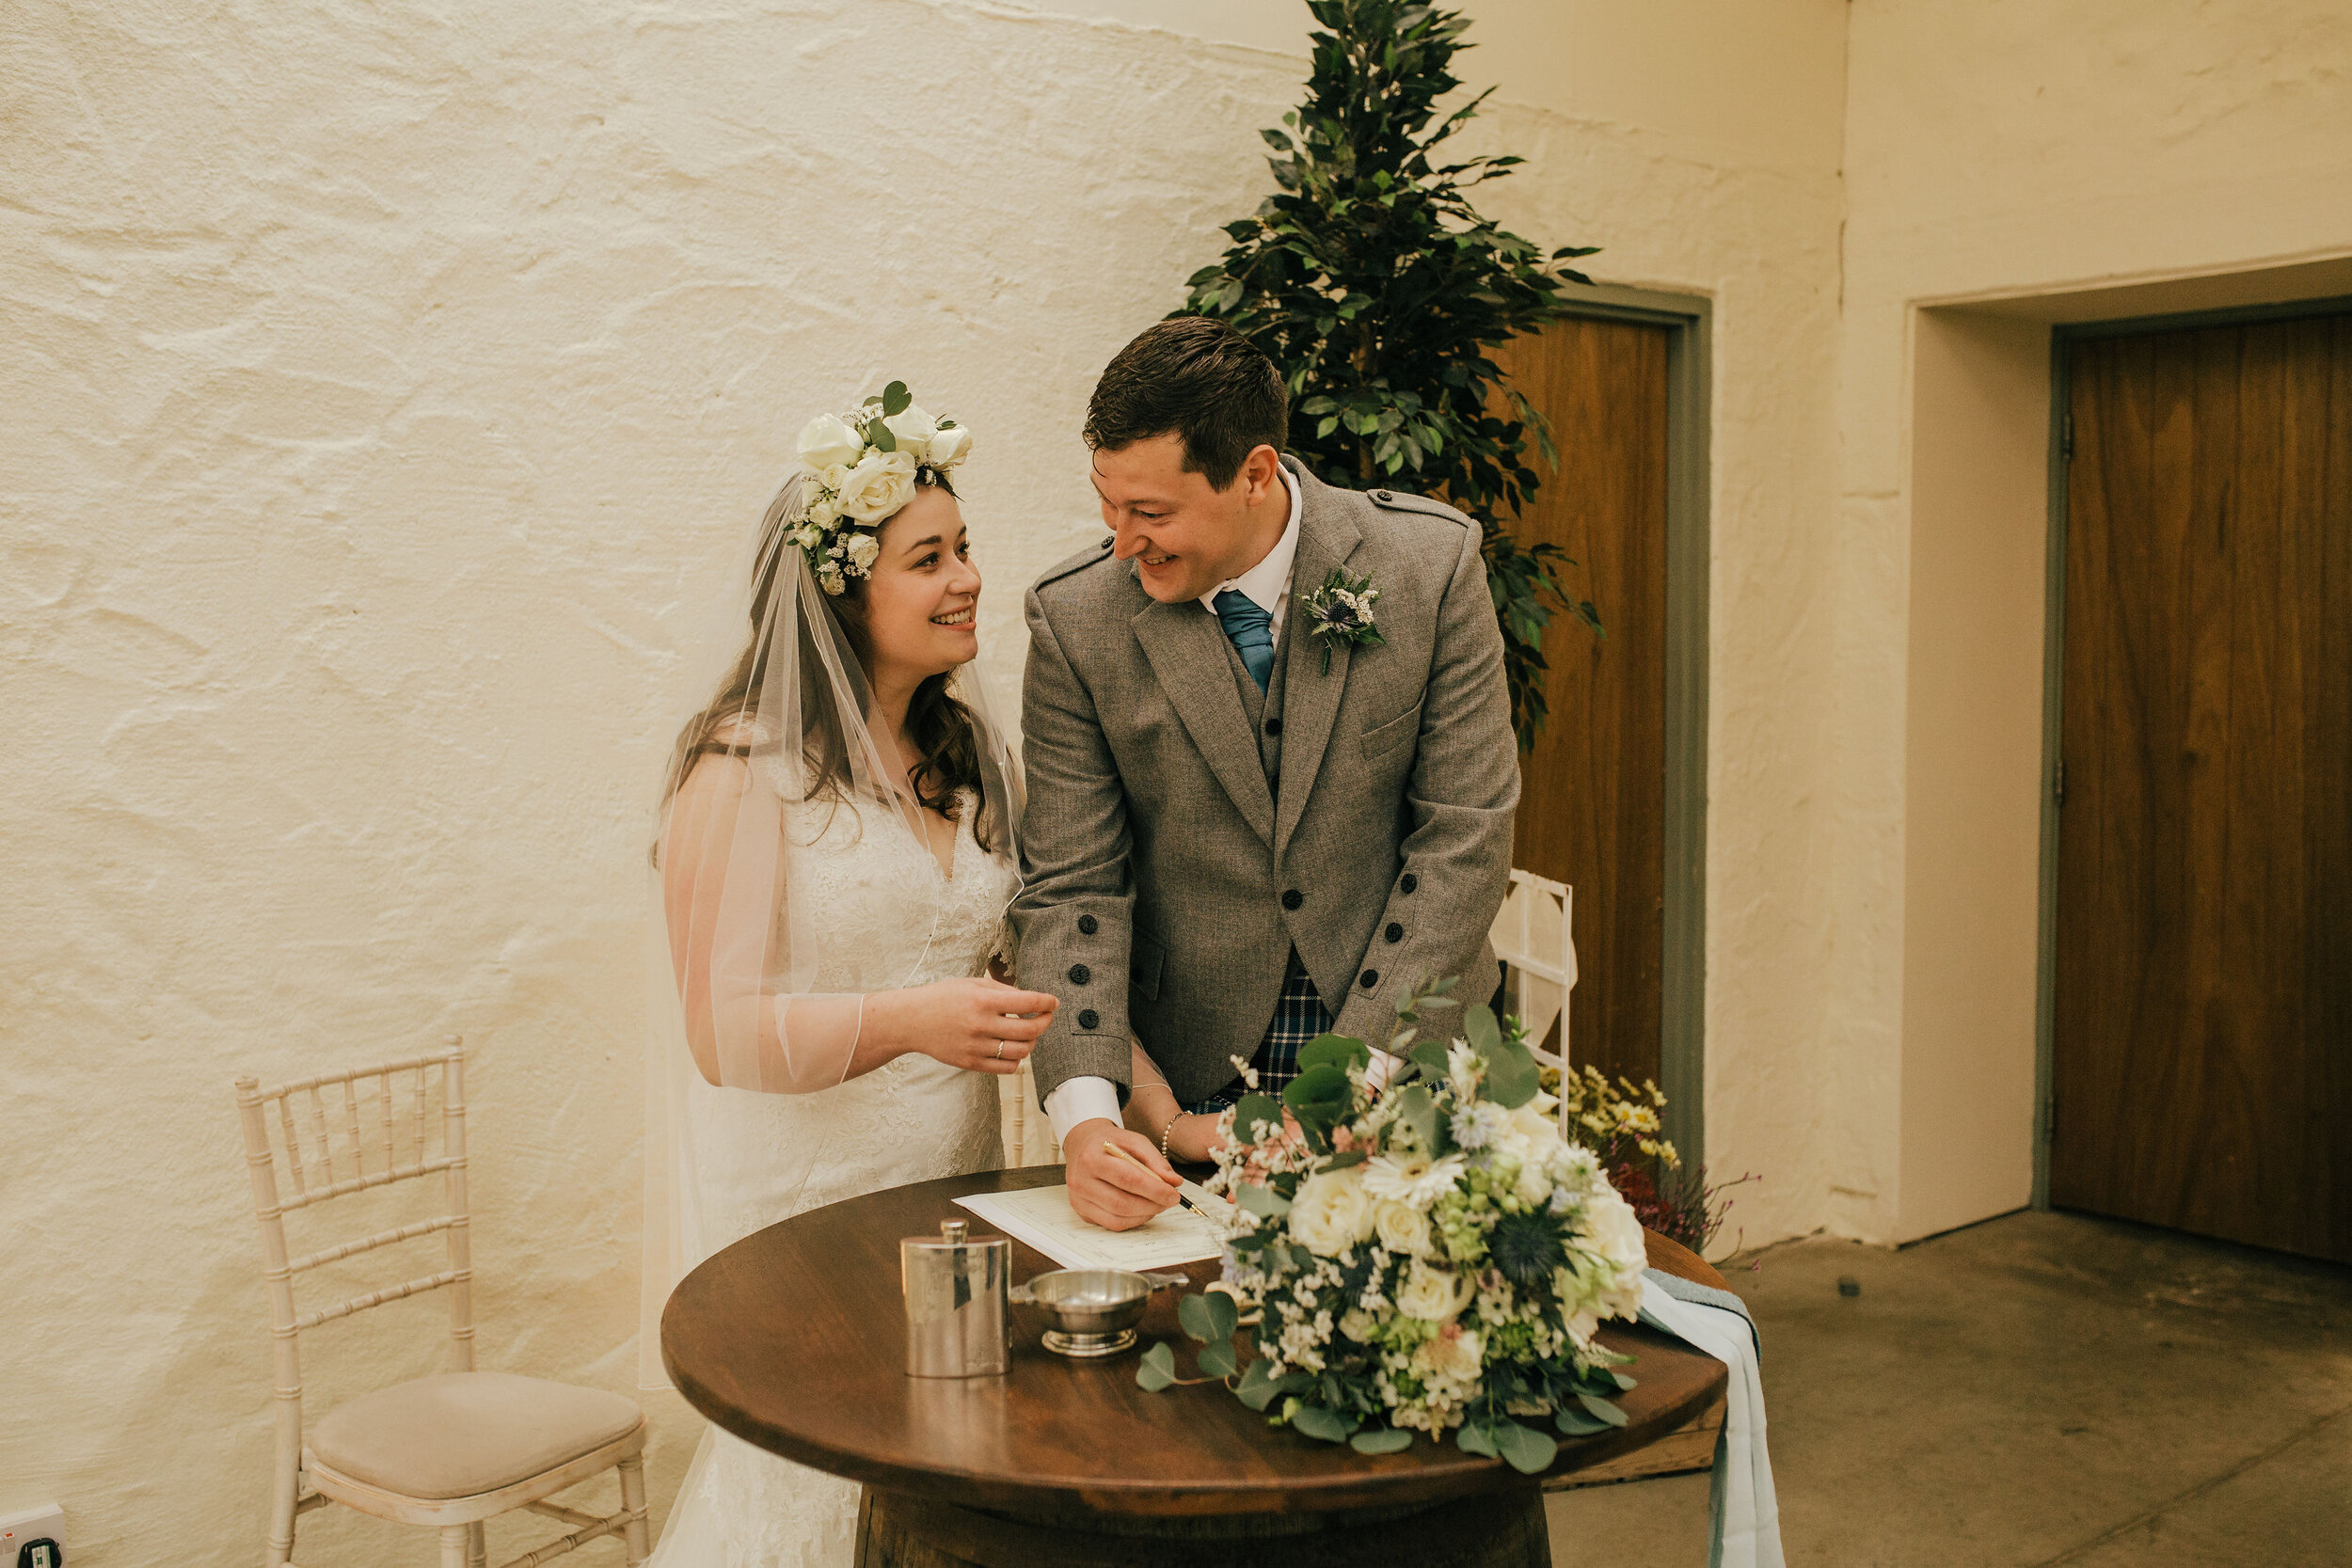 Bride and Groom getting married at Bachilton Barn, Scotland with Wedding flowers on table.